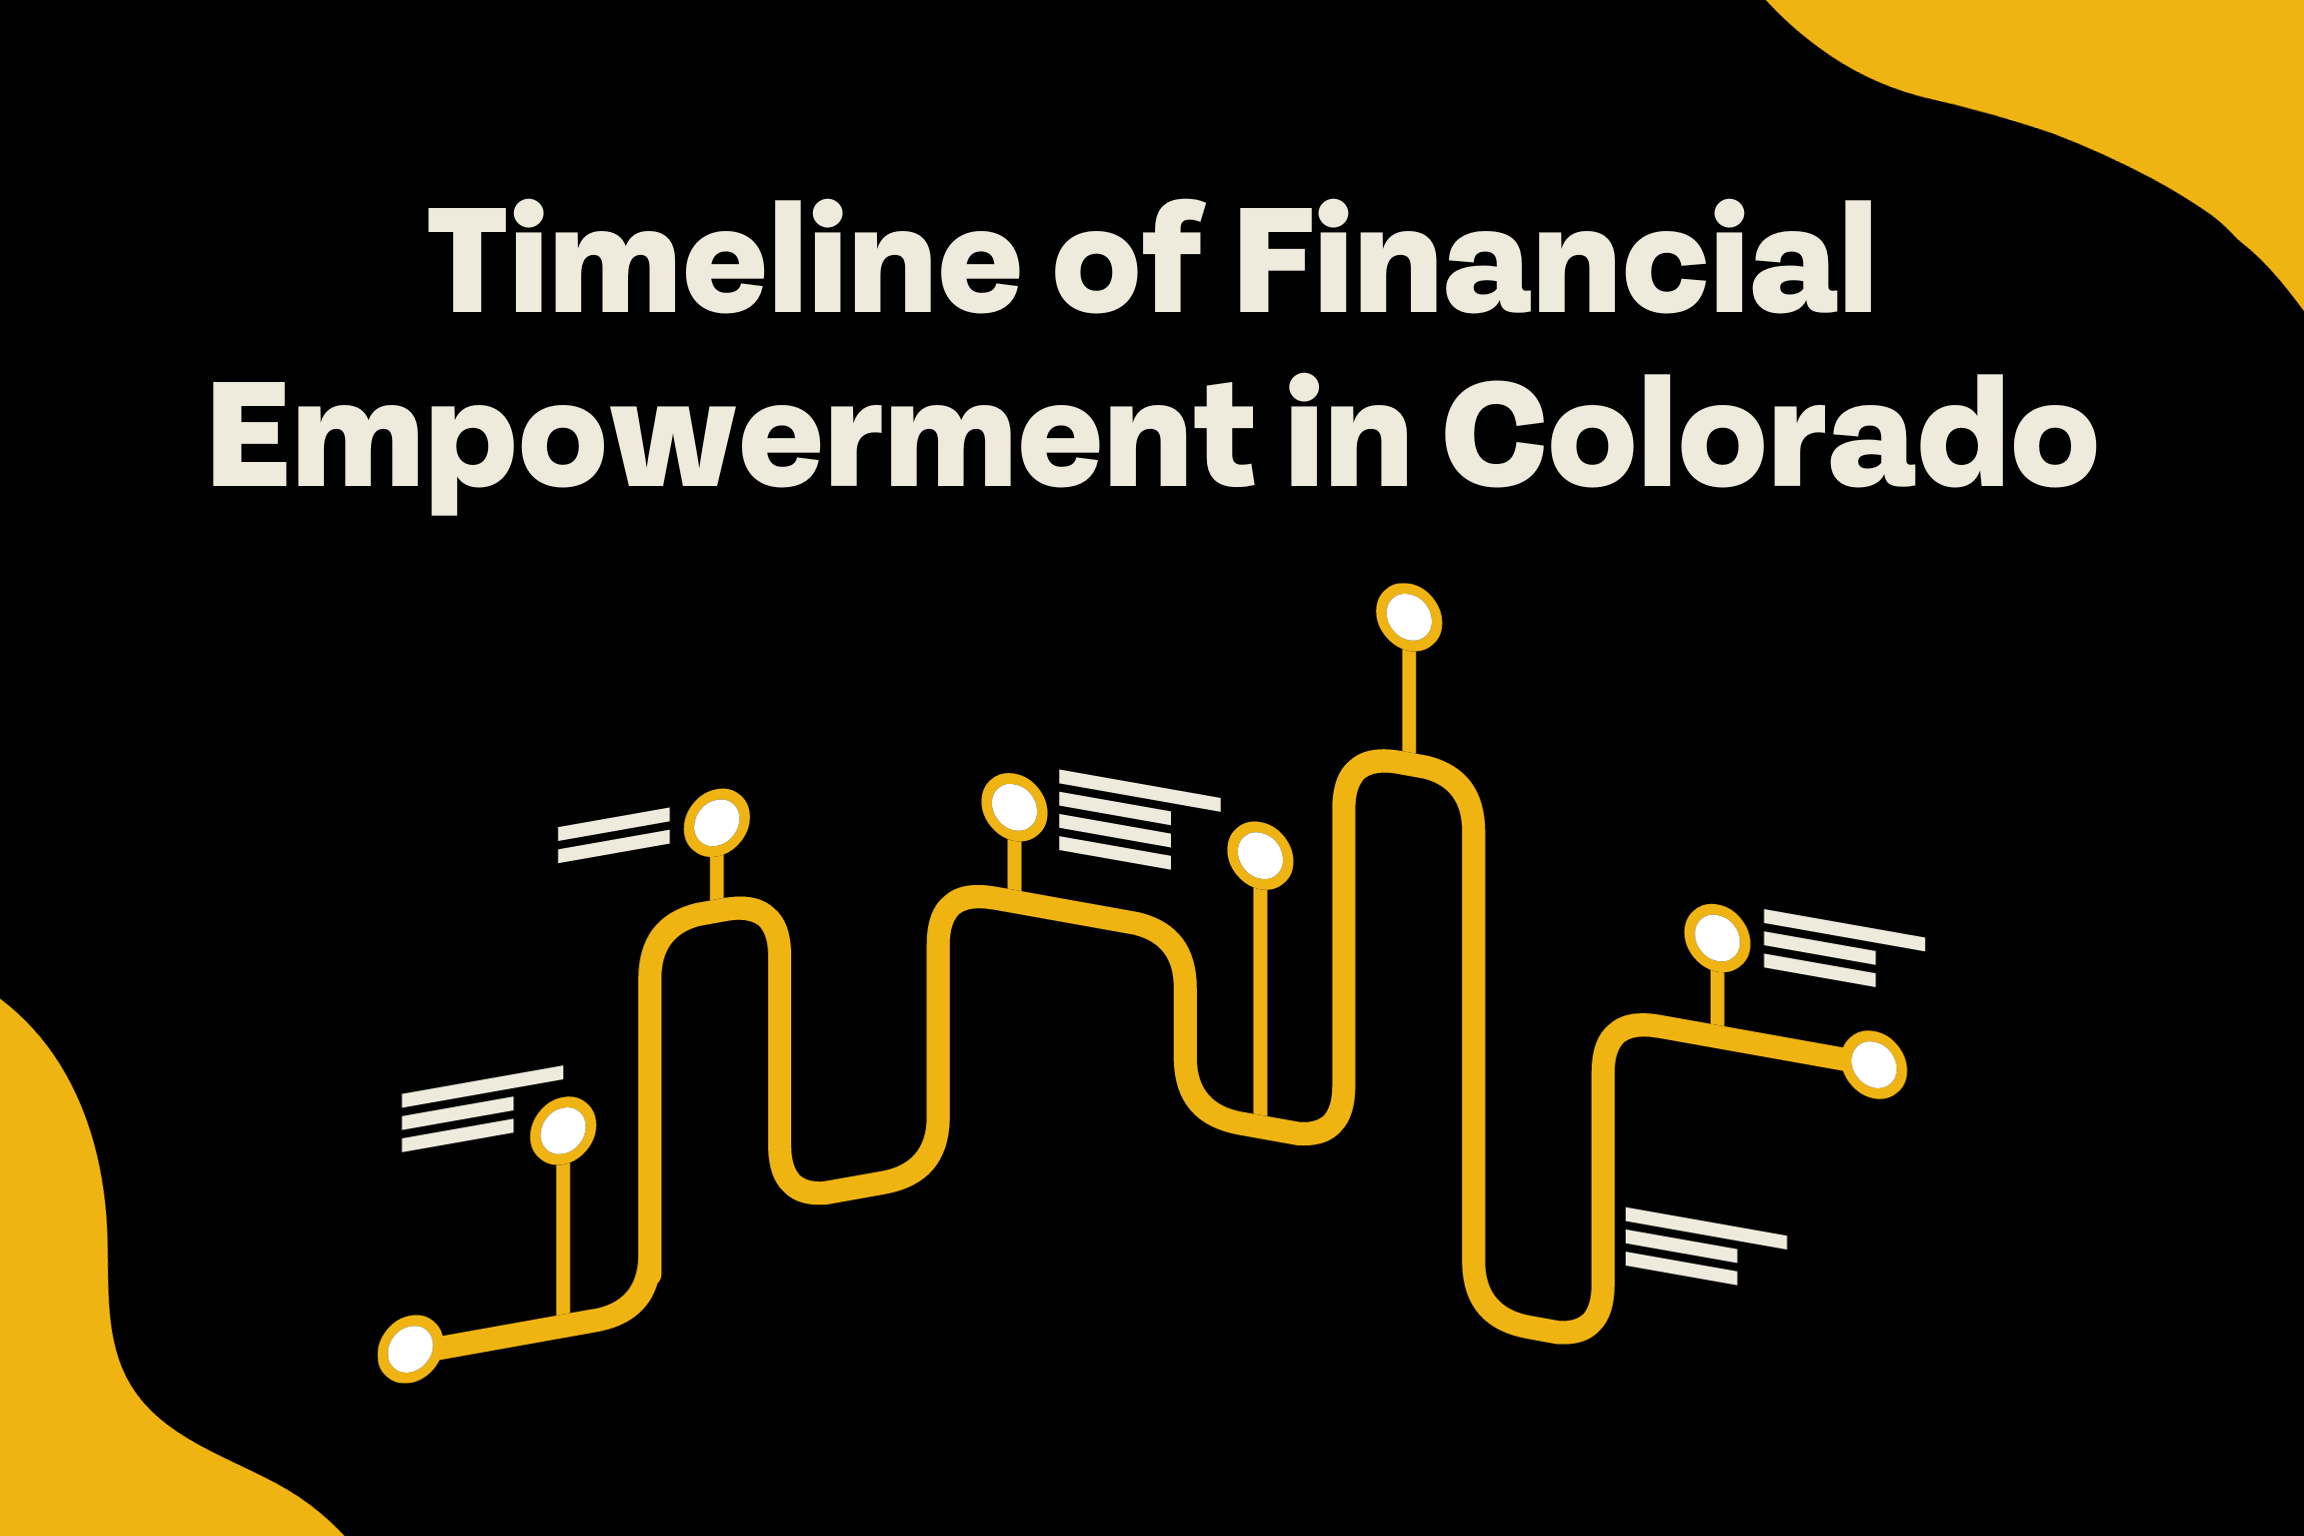 Timeline of Financial Empowerment in Colorado